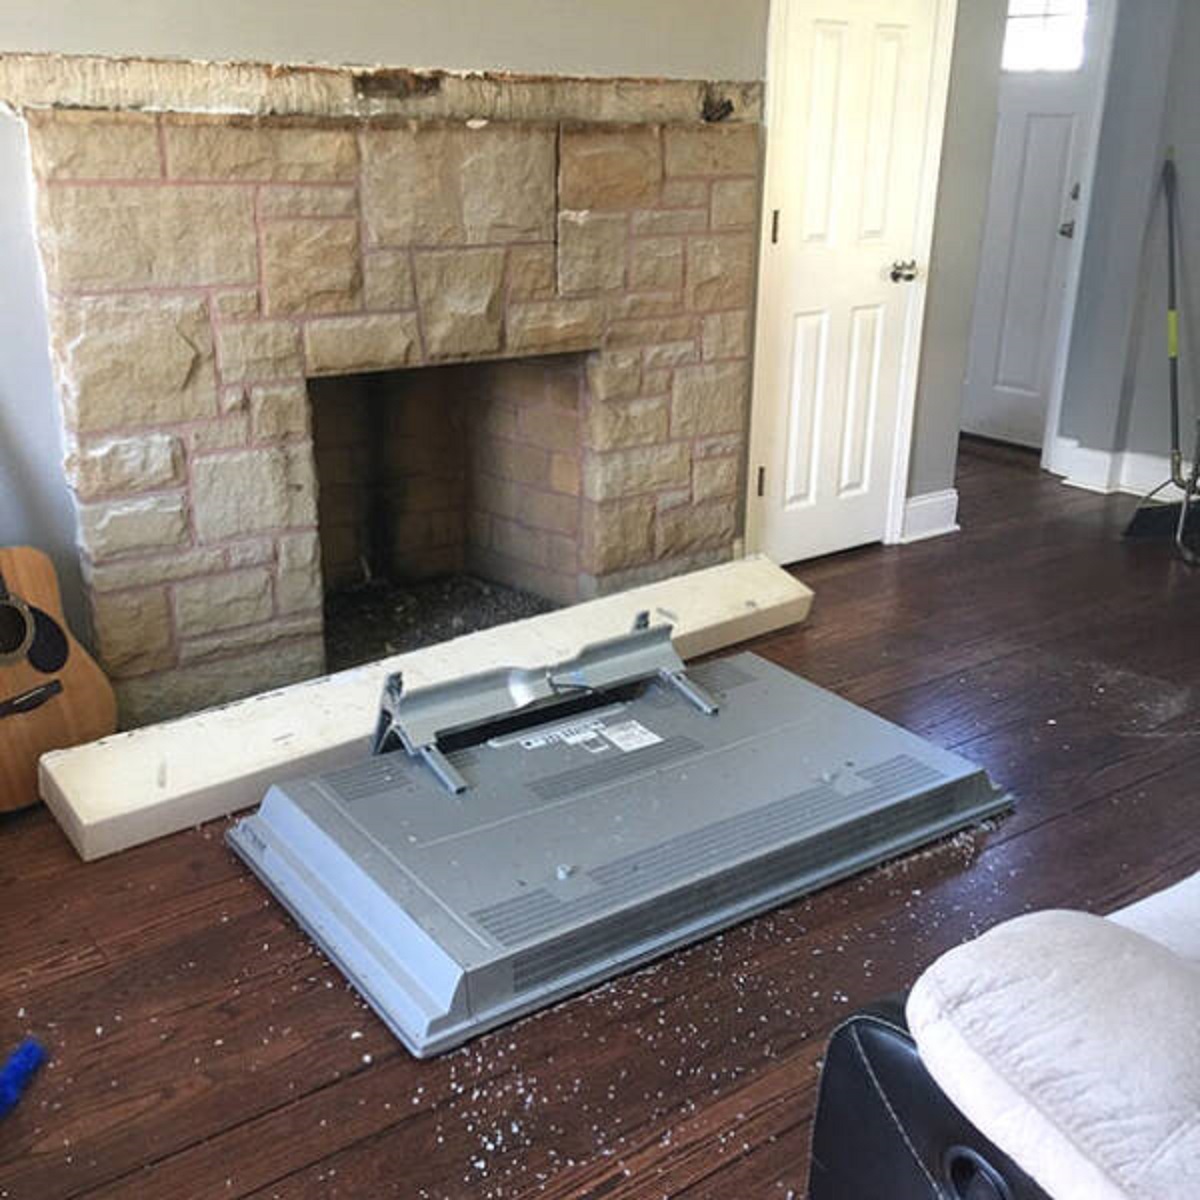 "Newly installed TV mount is holding up just fin.... OH NOOOOO!"